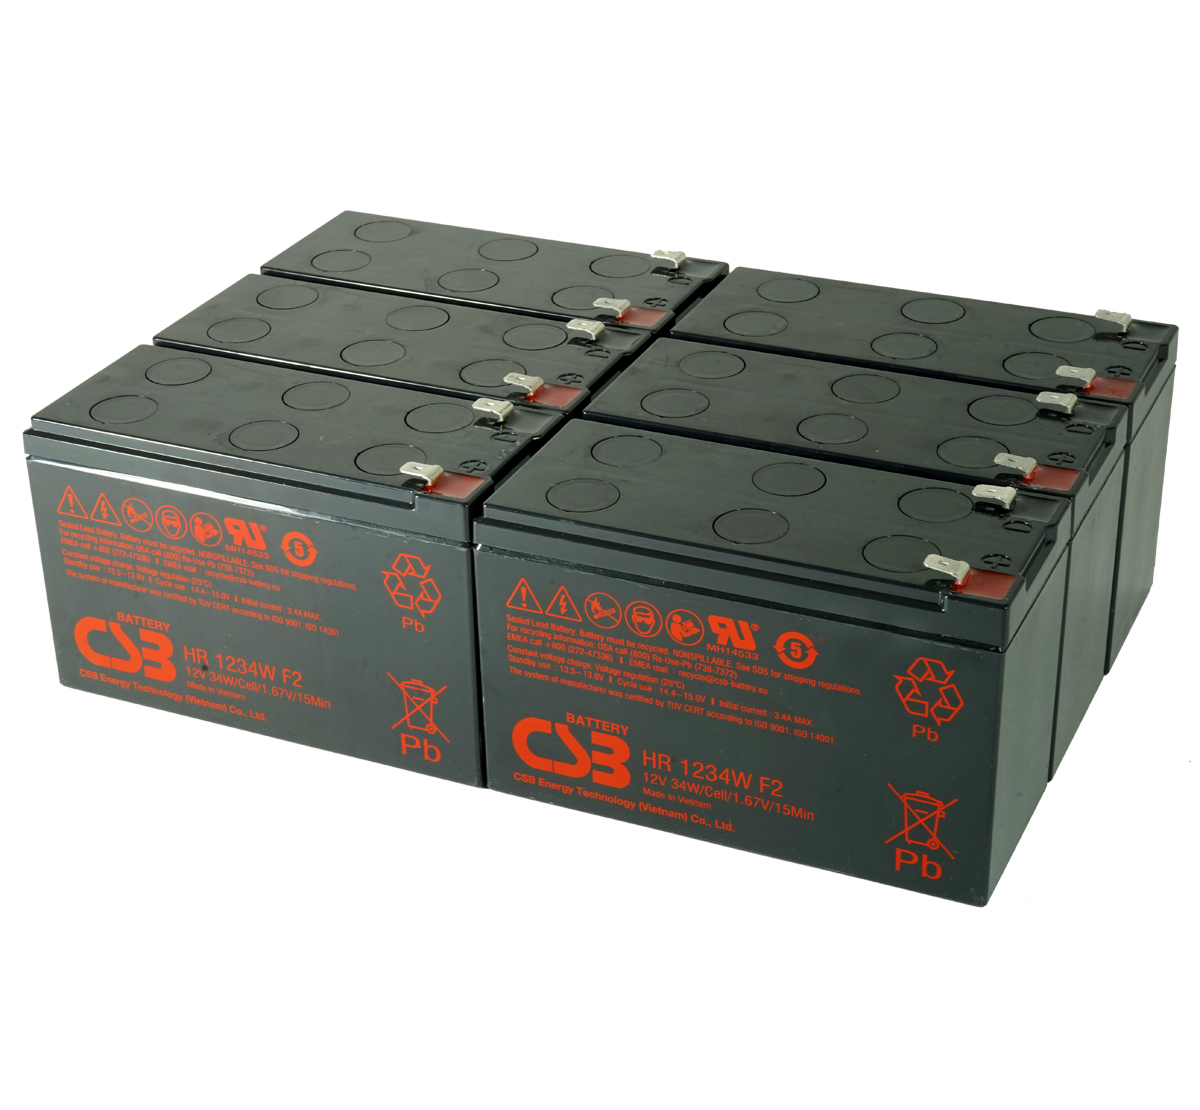 MDS2309 UPS Battery Lit for MGE AB2309